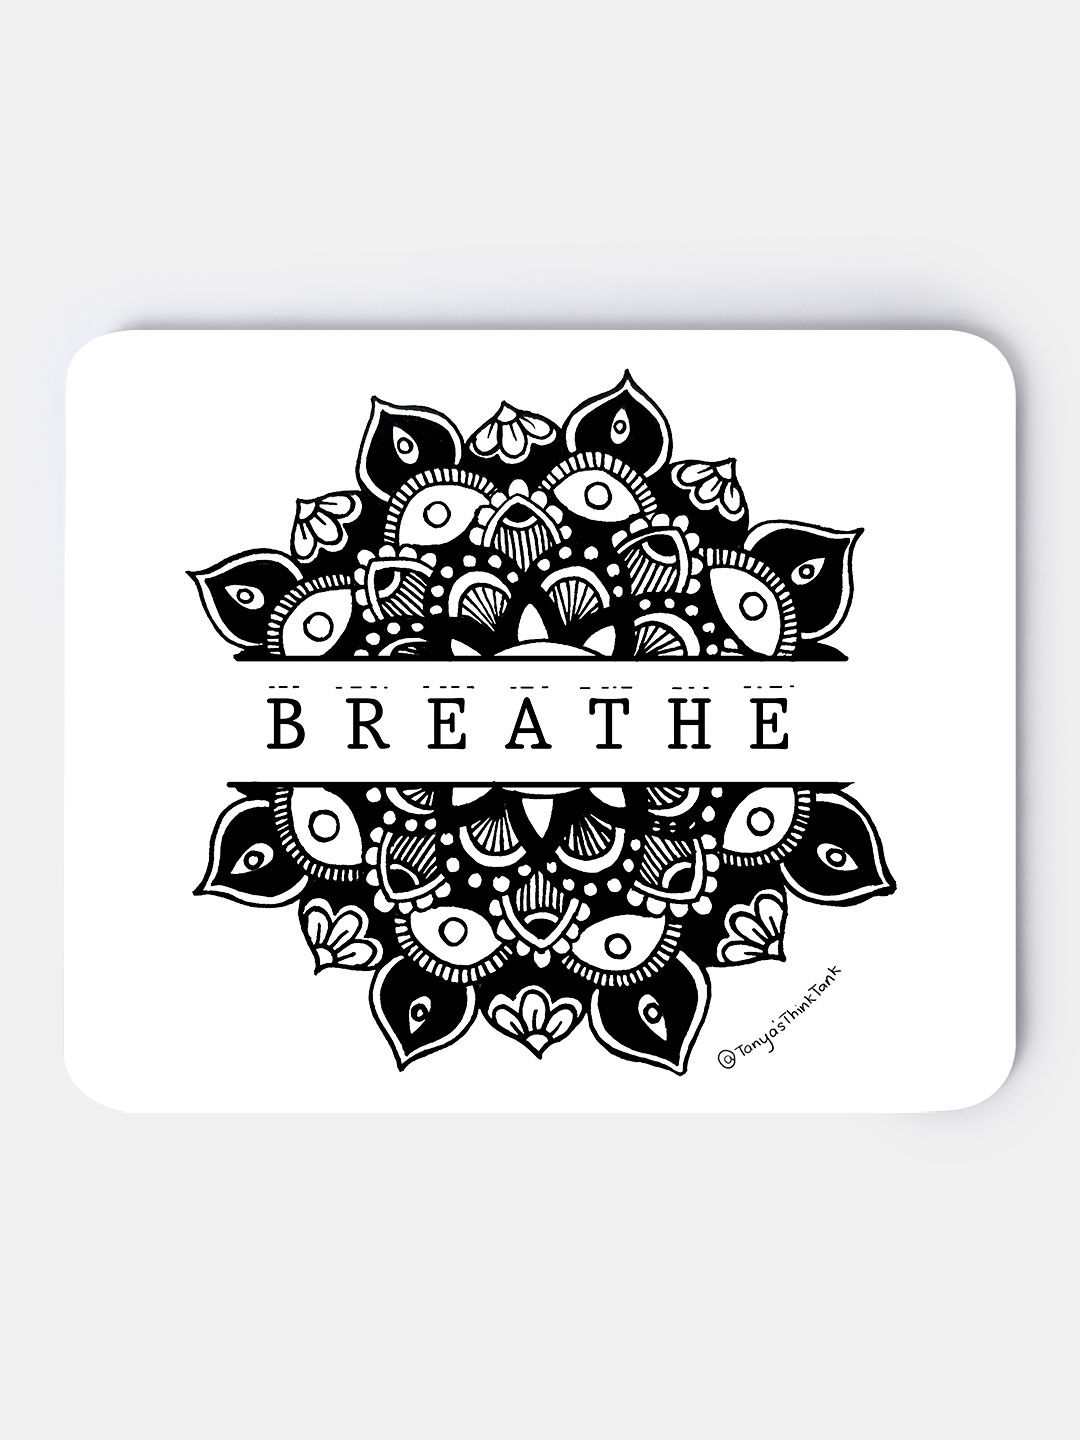 Buy Breathe - Macmerise Mouse Pad Mouse Pads Online